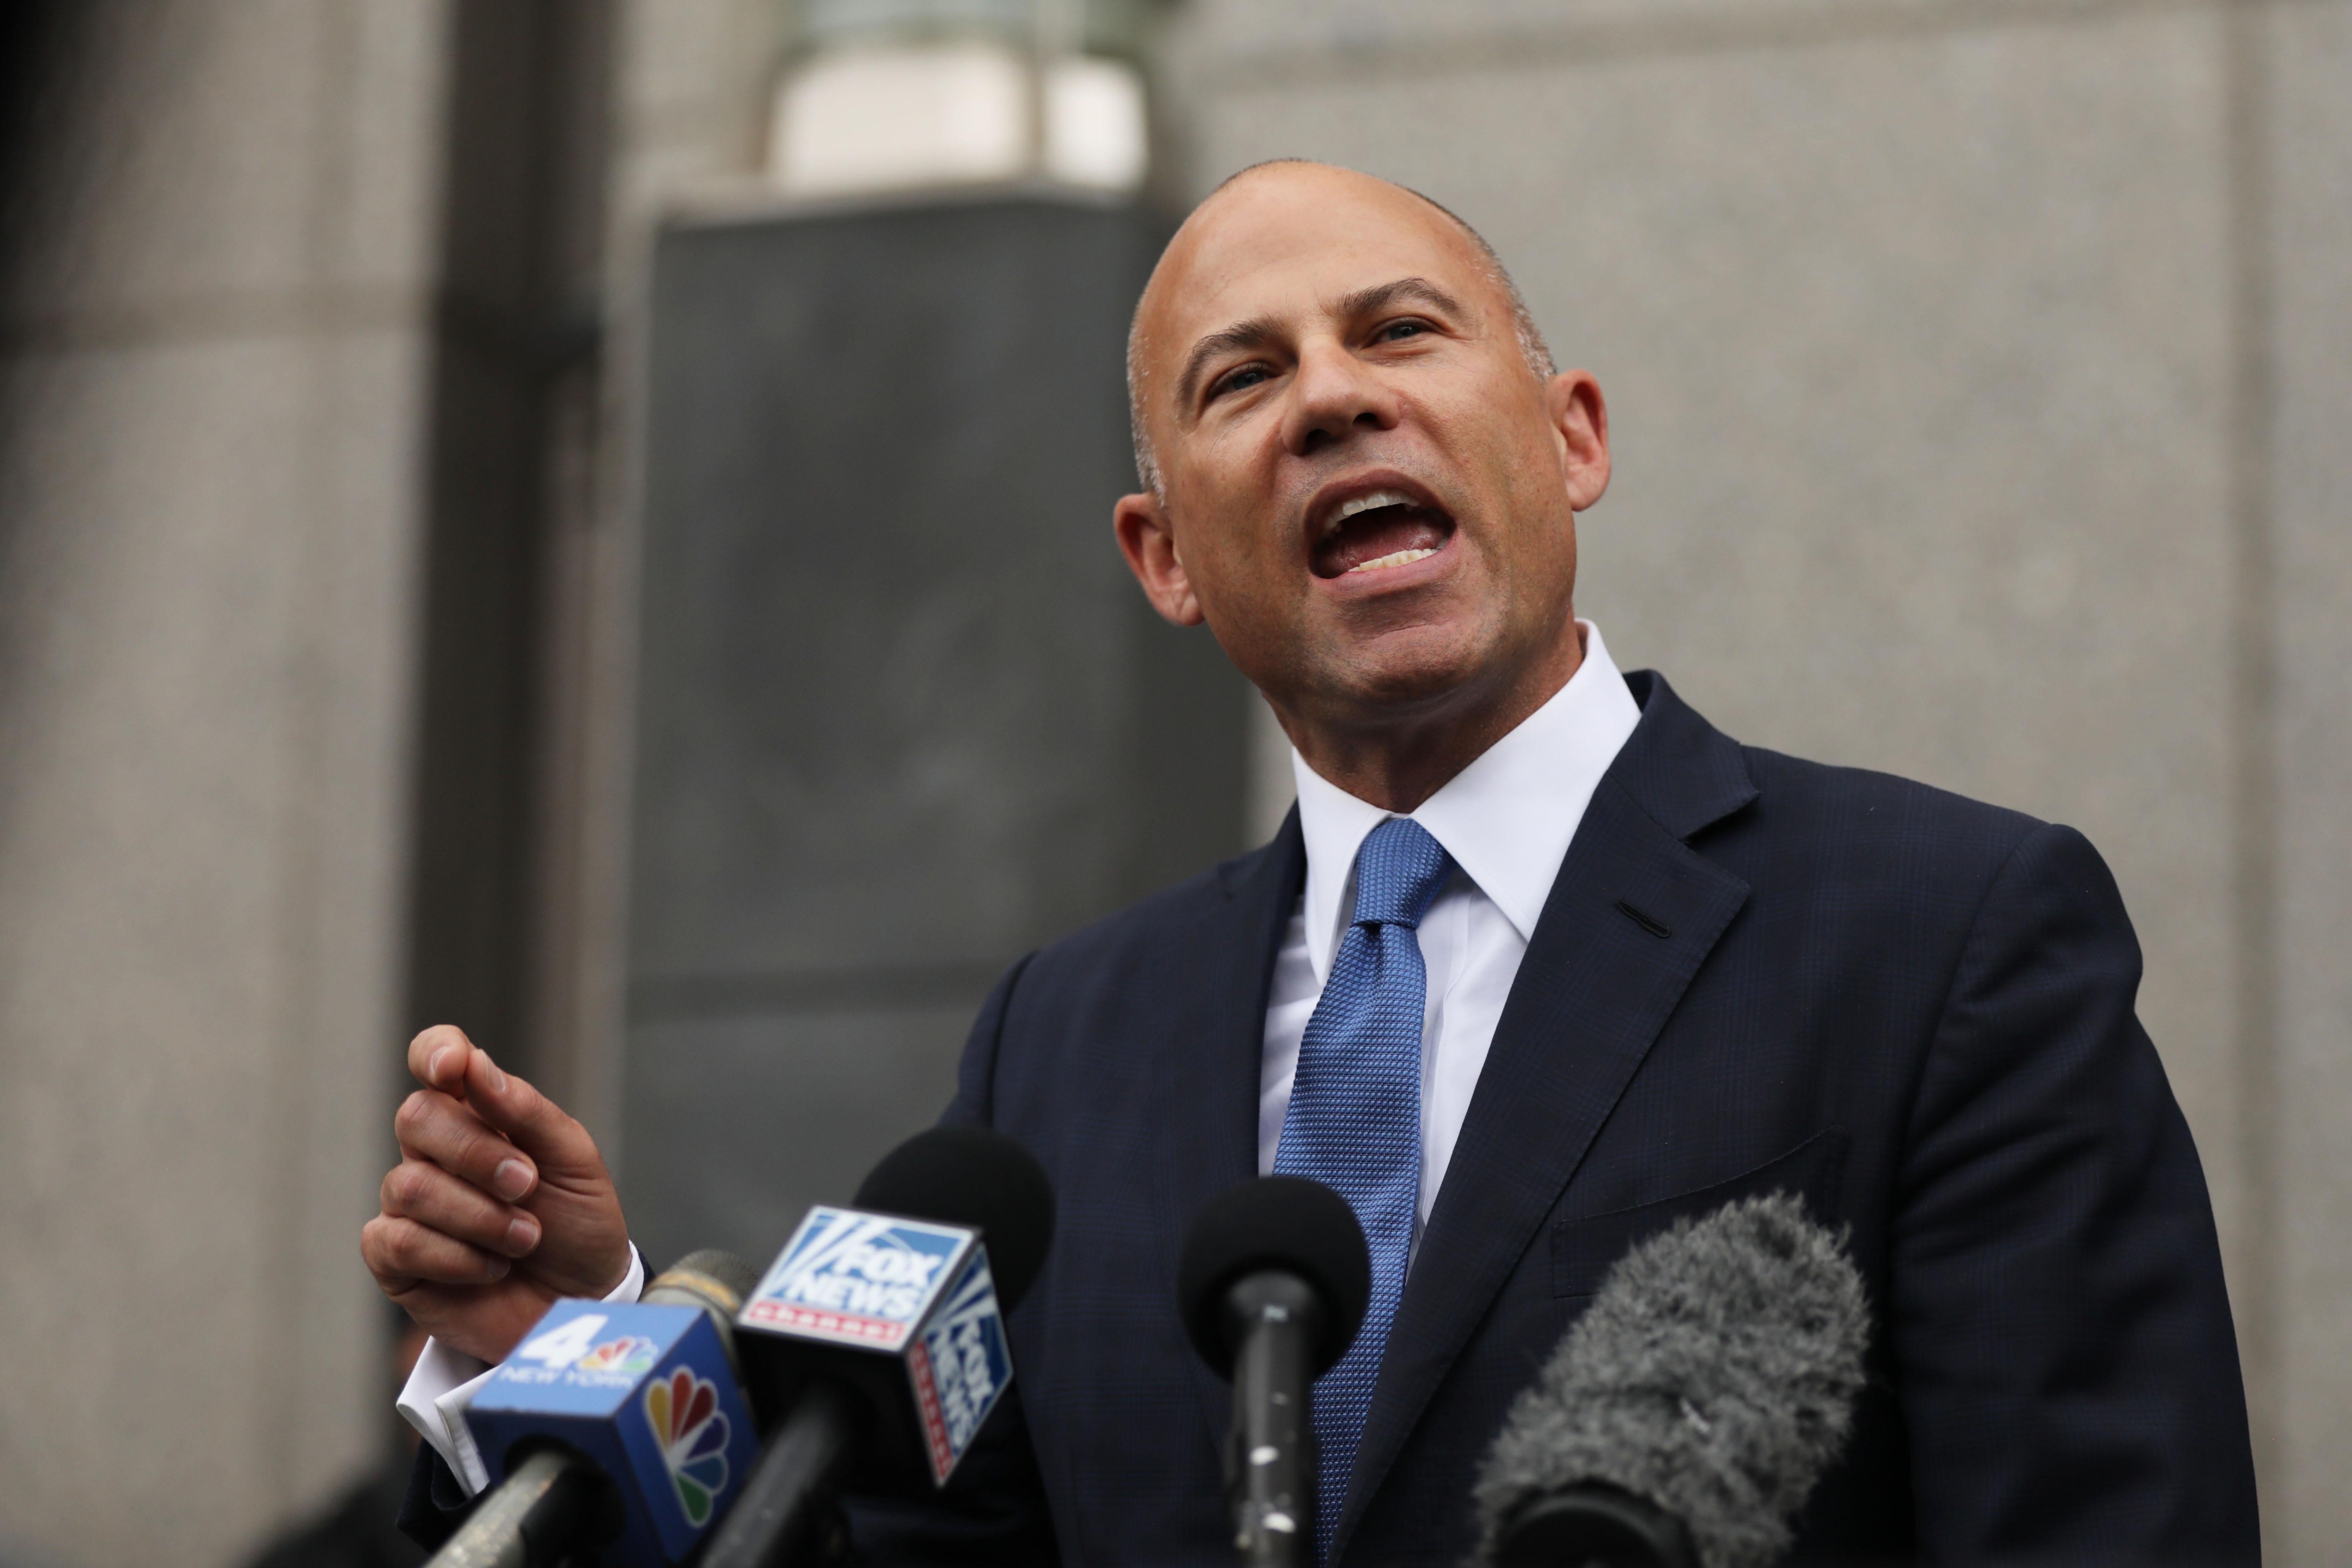 Avenatti points as he speaks into microphones outside of a New York courthouse.